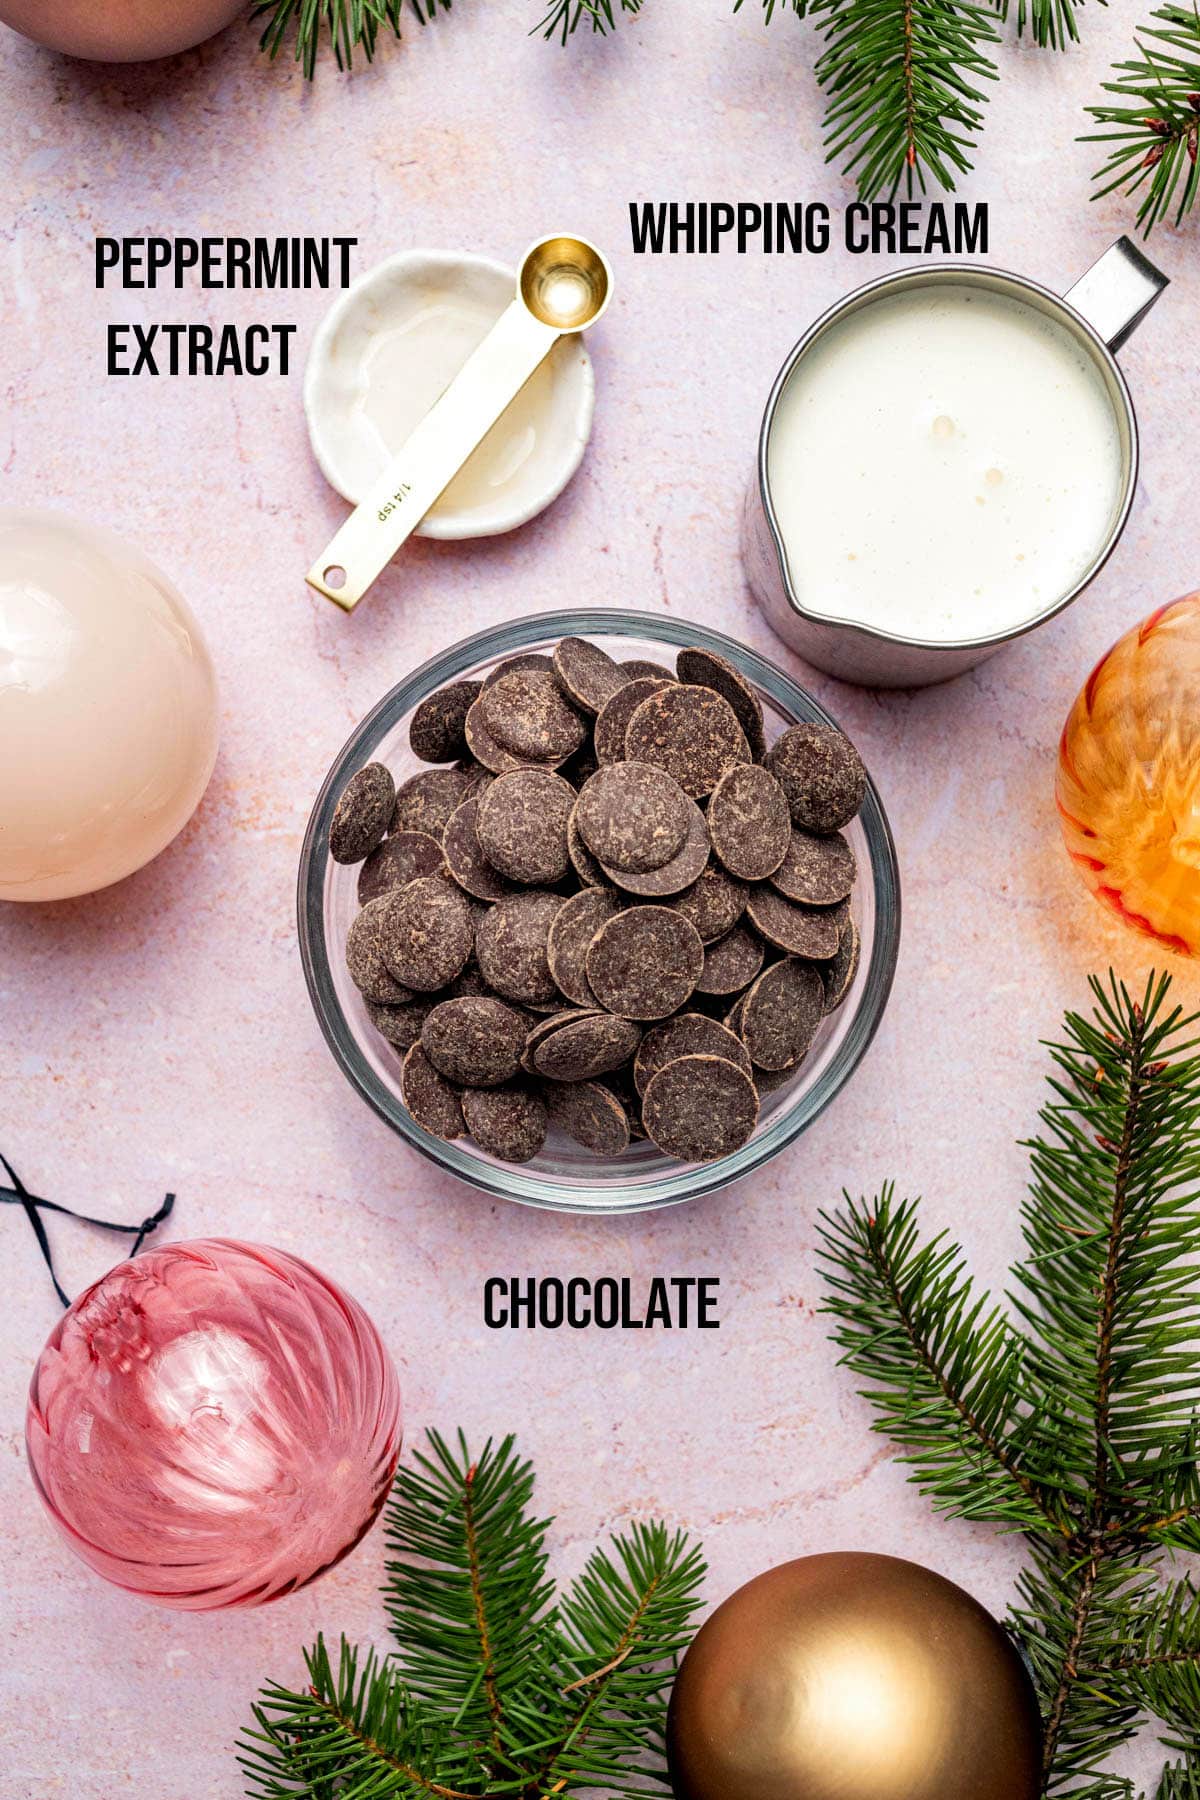 Mint chocolate truffle ingredients with labels.